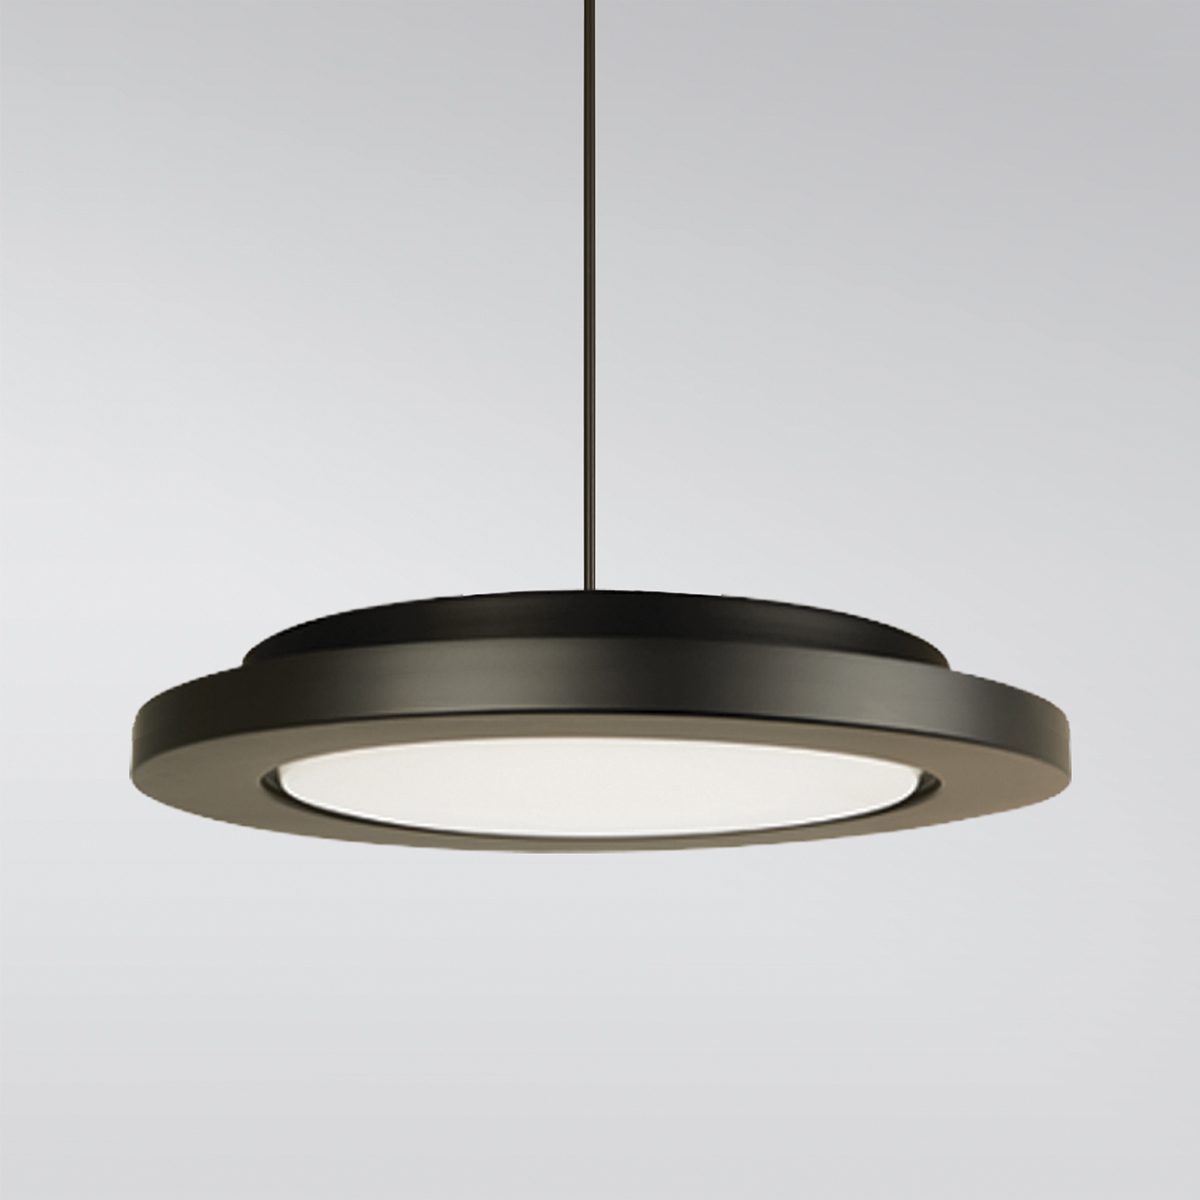 A circular pendant with a thick outer band, suspended by a stem